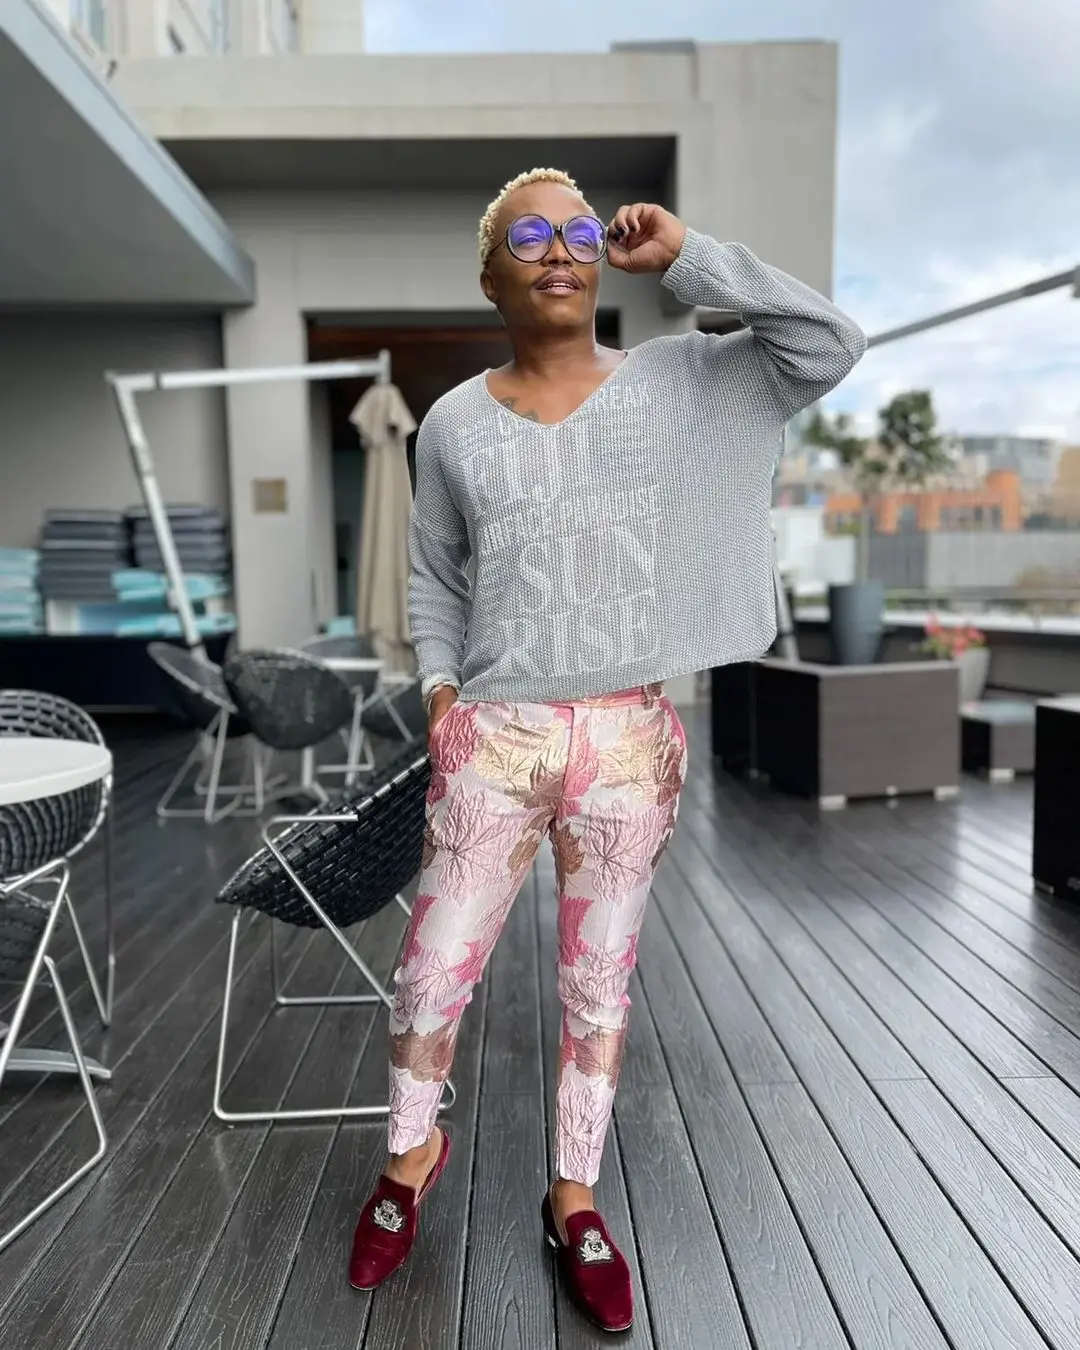 Social Media in stitches as Somizi struggles with spelling – VIDEO